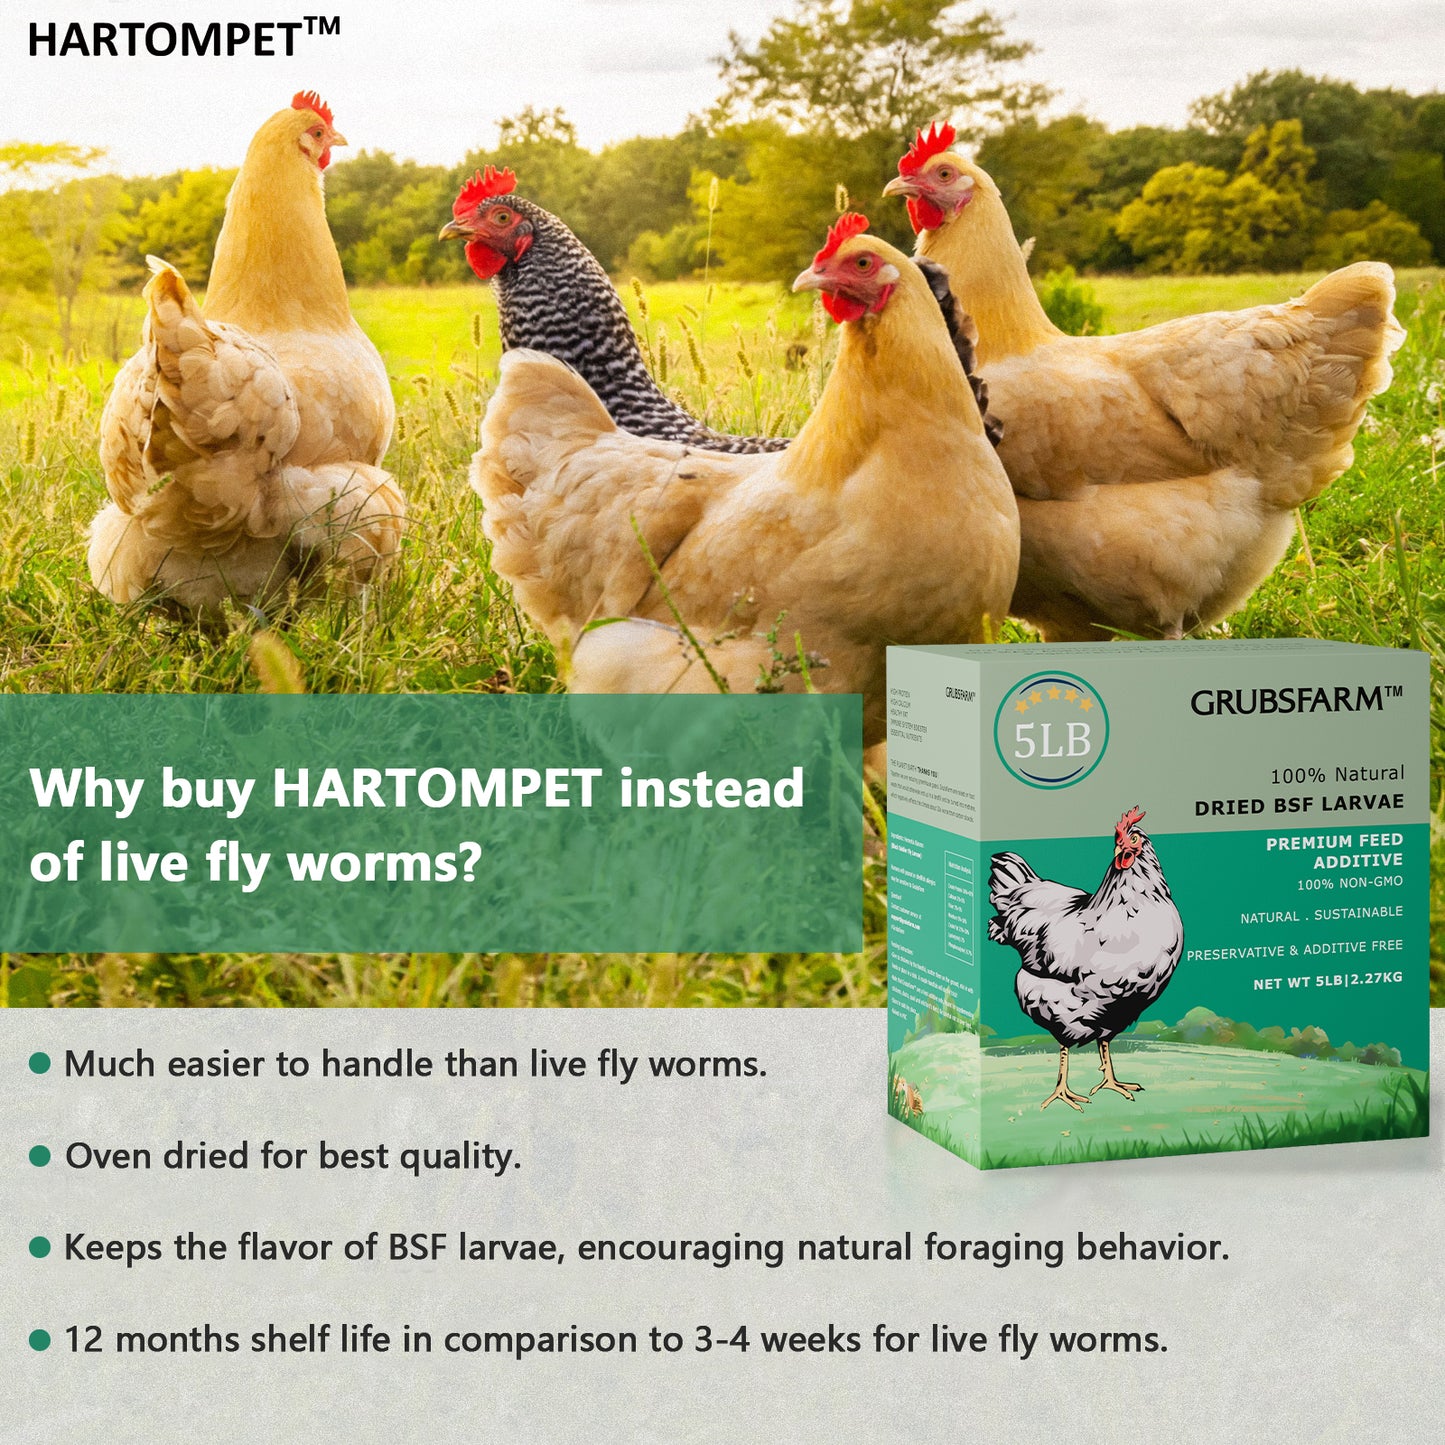 HARTOMPET Premium Dried Black Soldier Fly Larvae for Chickens - Superior to Mealworms - 85X More Calcium Than Meal Worms - Molting & Laying Hens Supplement - Non-GMO BSF Larvae Treats for Ducks